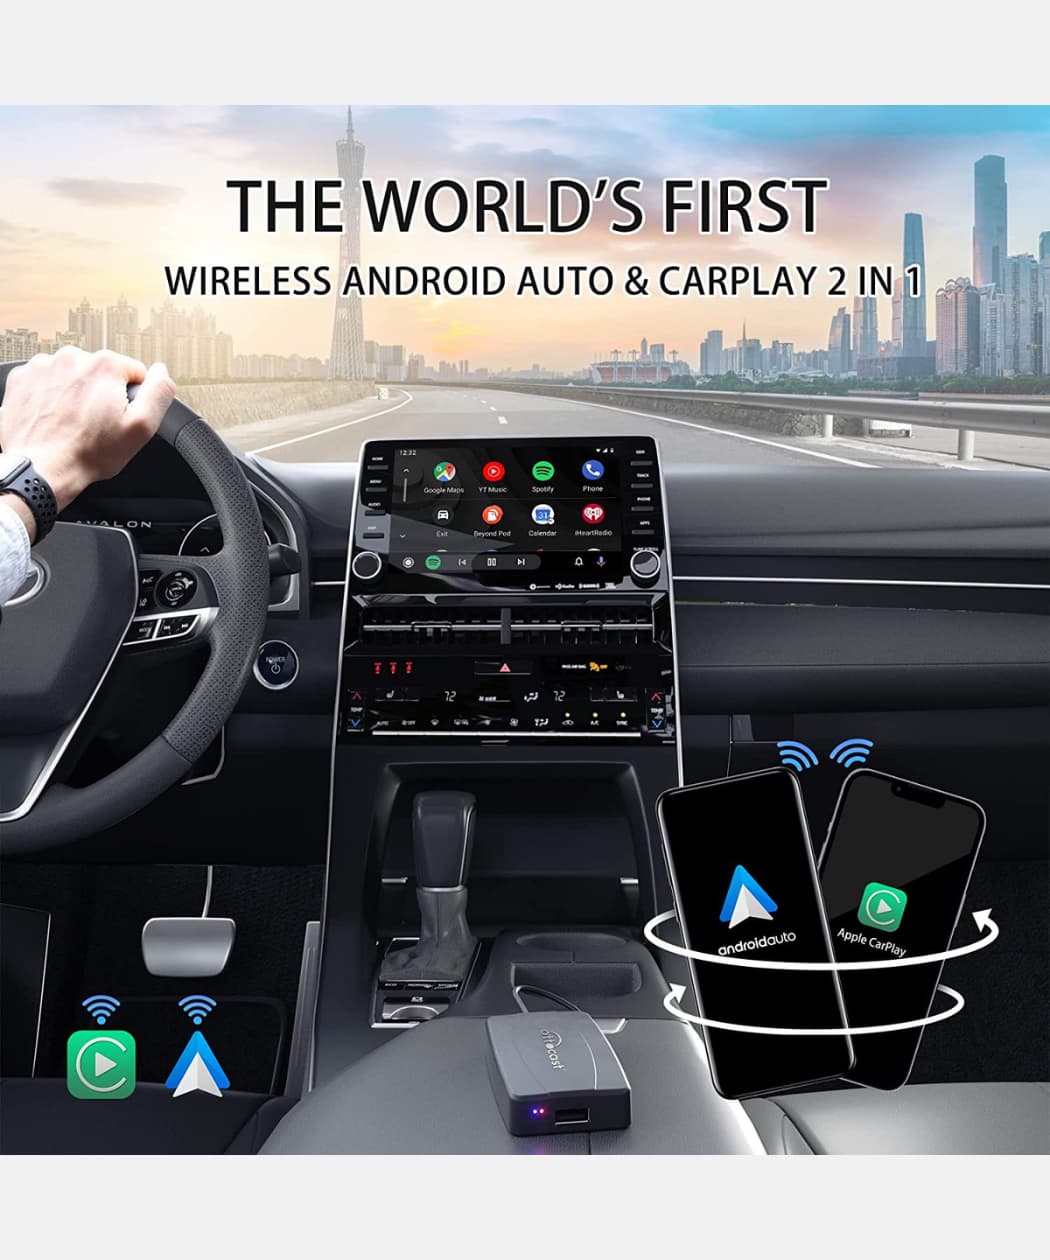 Ottocast U2-X Wireless Android Auto & Apple CarPlay 2 in 1 Adapter Review